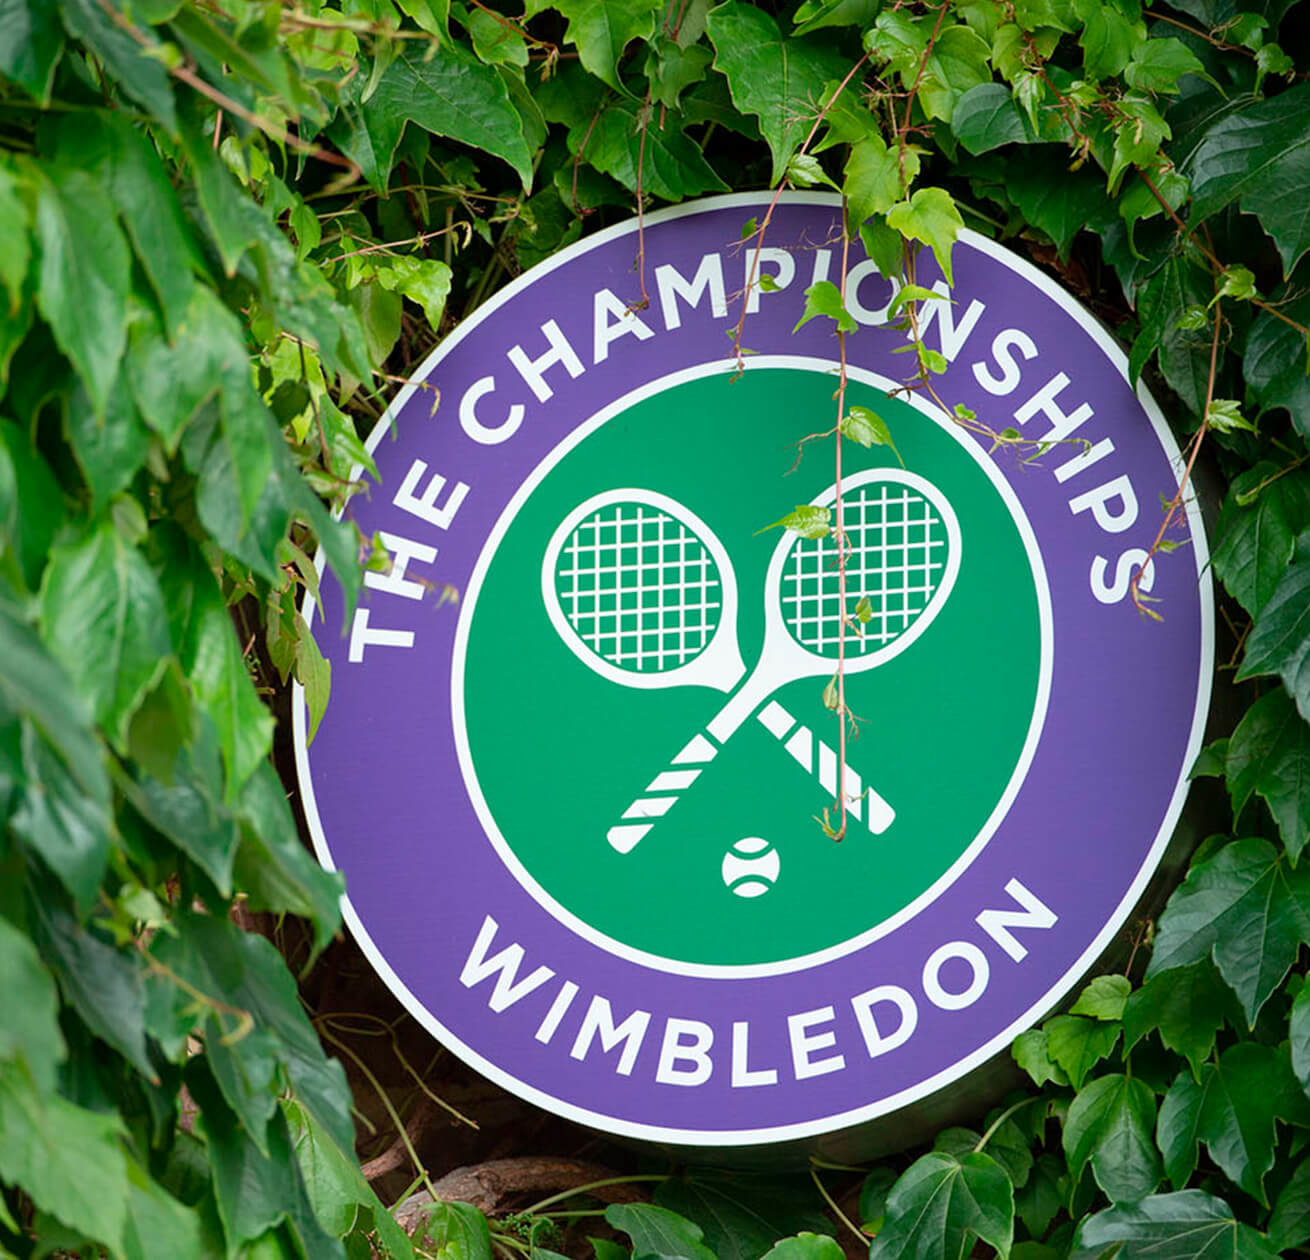 Wimbledon sign in some leaves